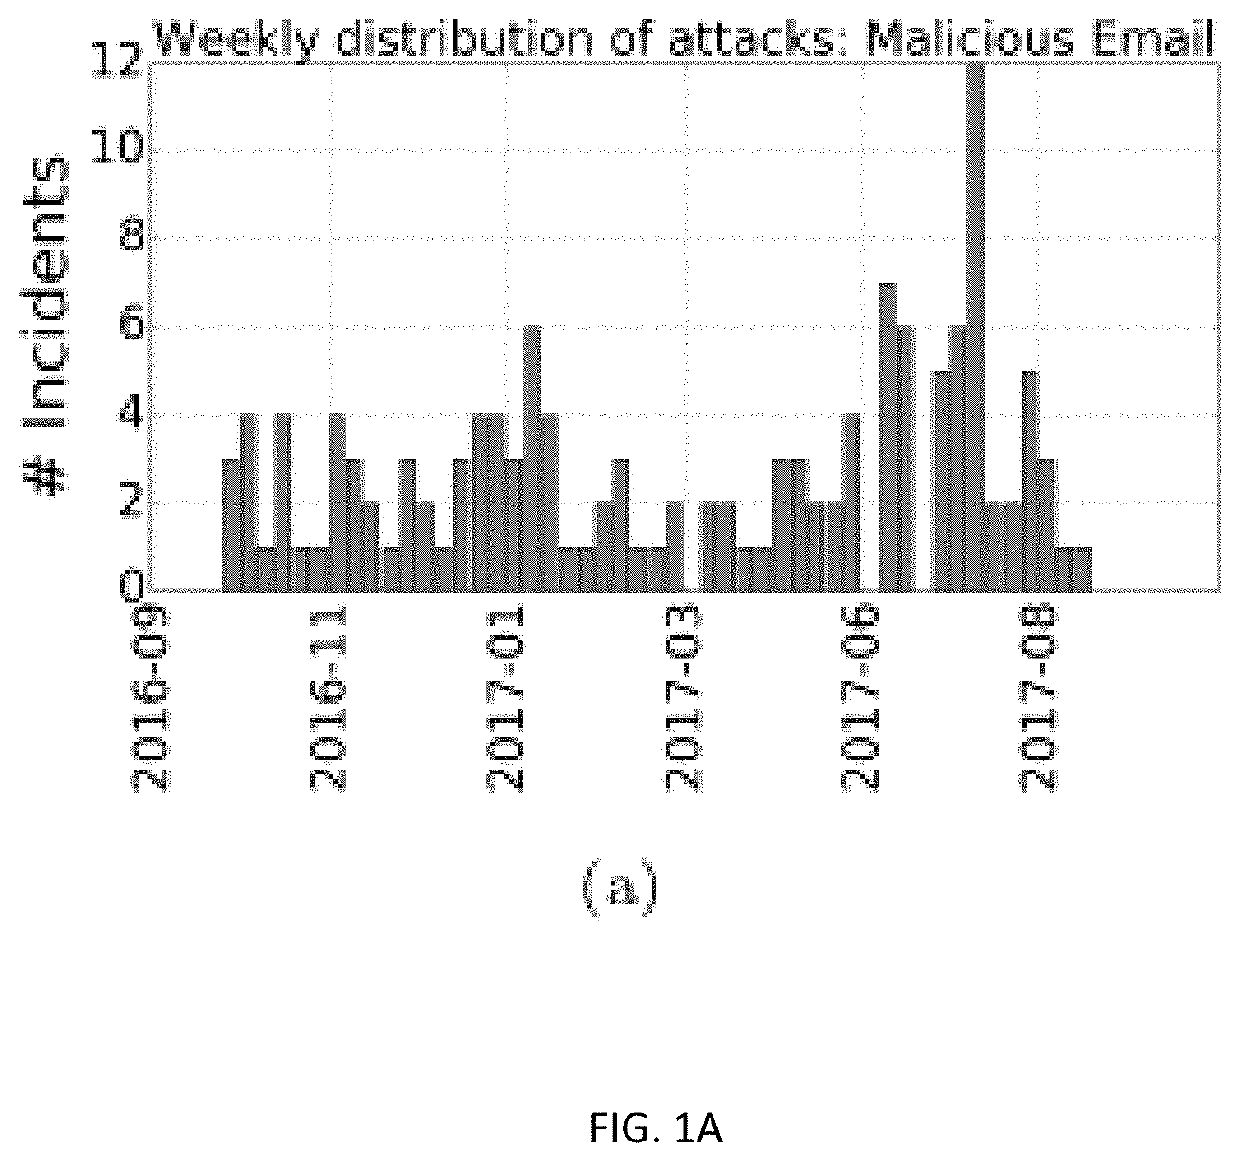 Systems and methods for social network analysis on dark web forums to predict enterprise cyber incidents